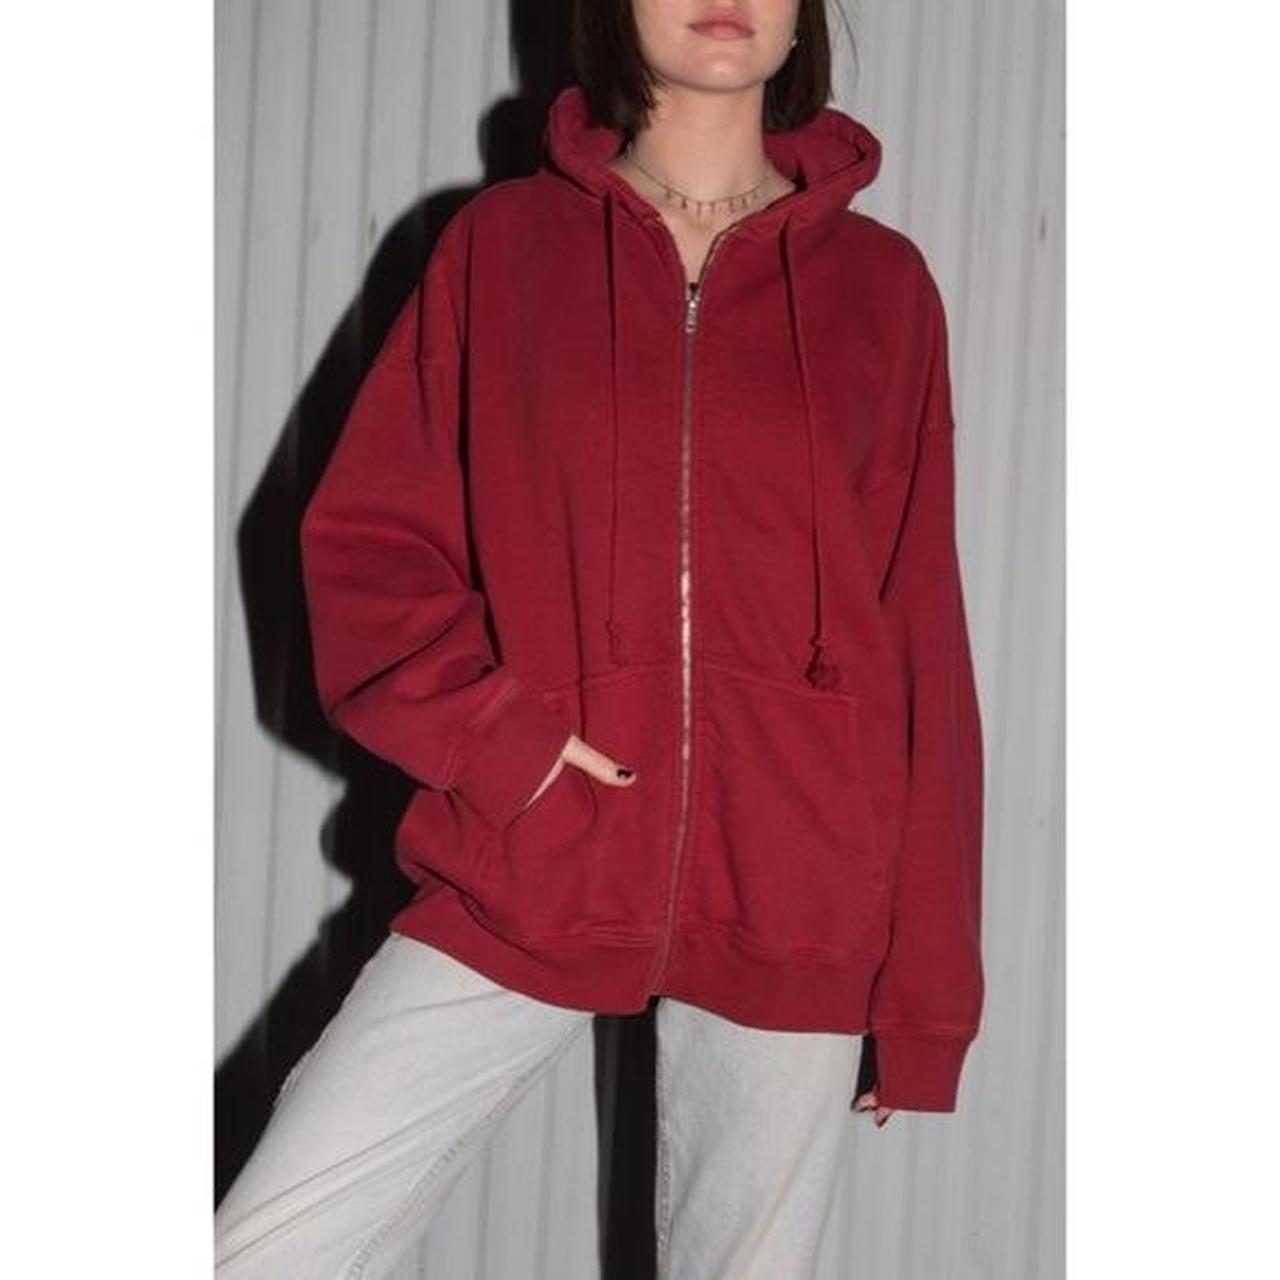 BRANDY MELVILLE RED oversize zip up Christy hoodie NWT sz L/XL $65.00 -  PicClick